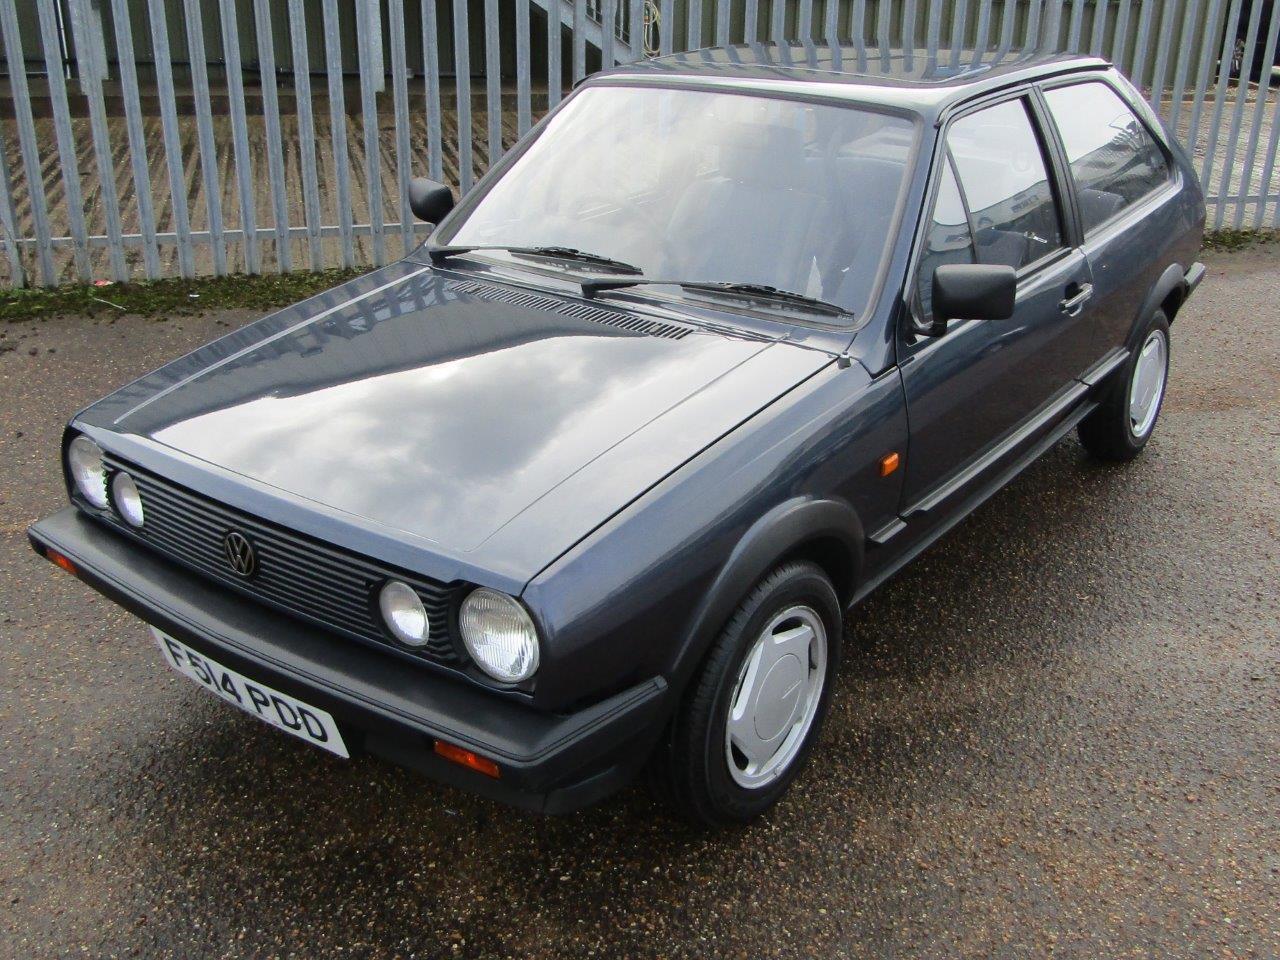 1988 VW Polo 1.3 Coupe S 39,000 miles from new